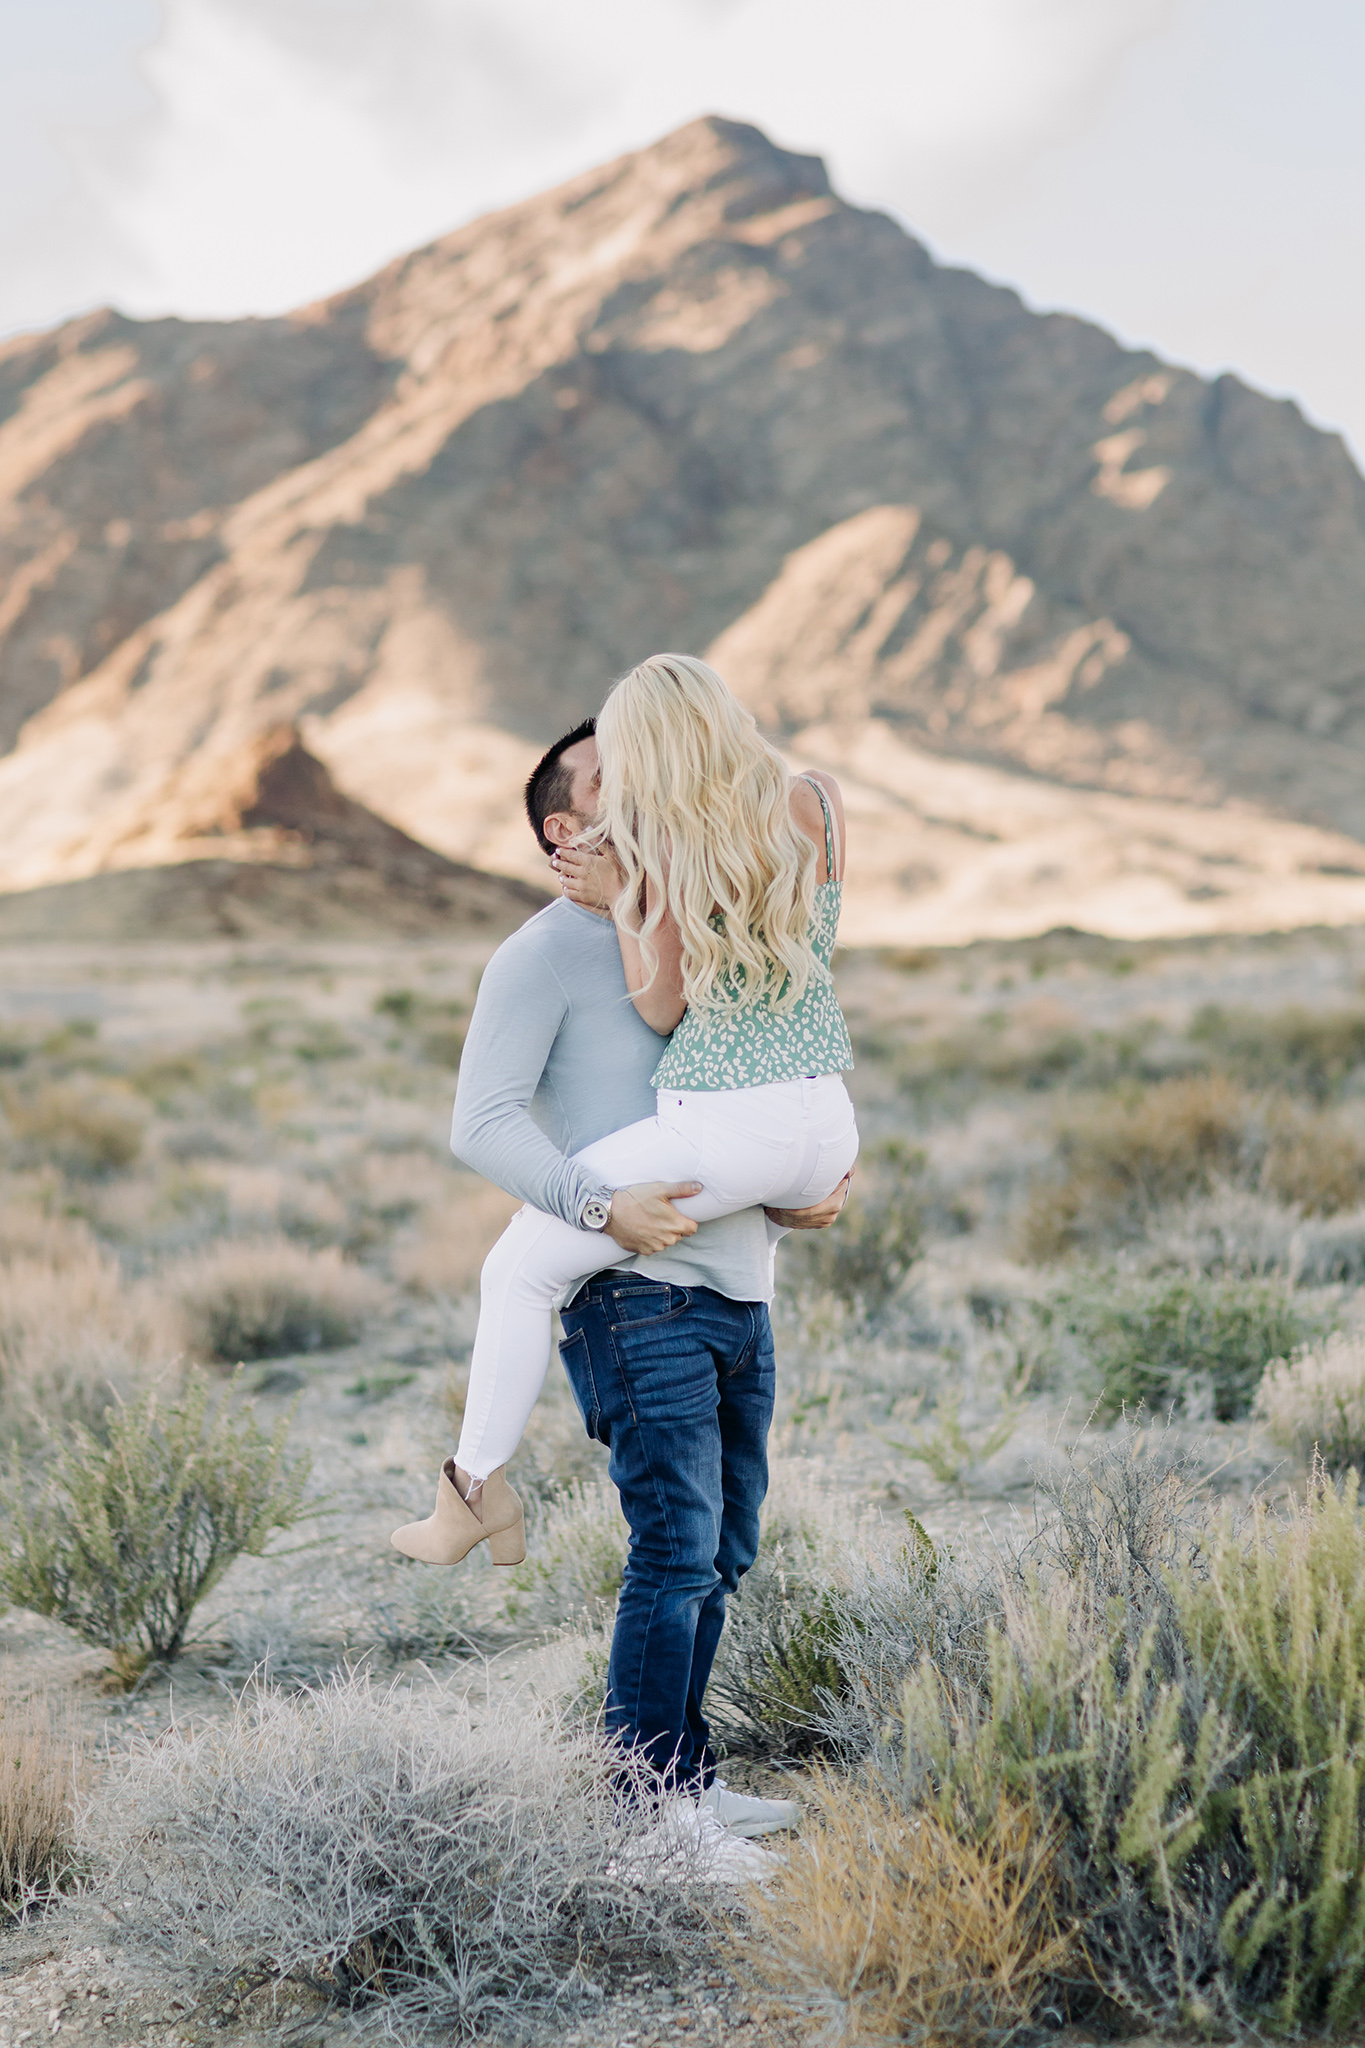 west wendover nevada desert couples photo shoot by ENV Photography in the spring